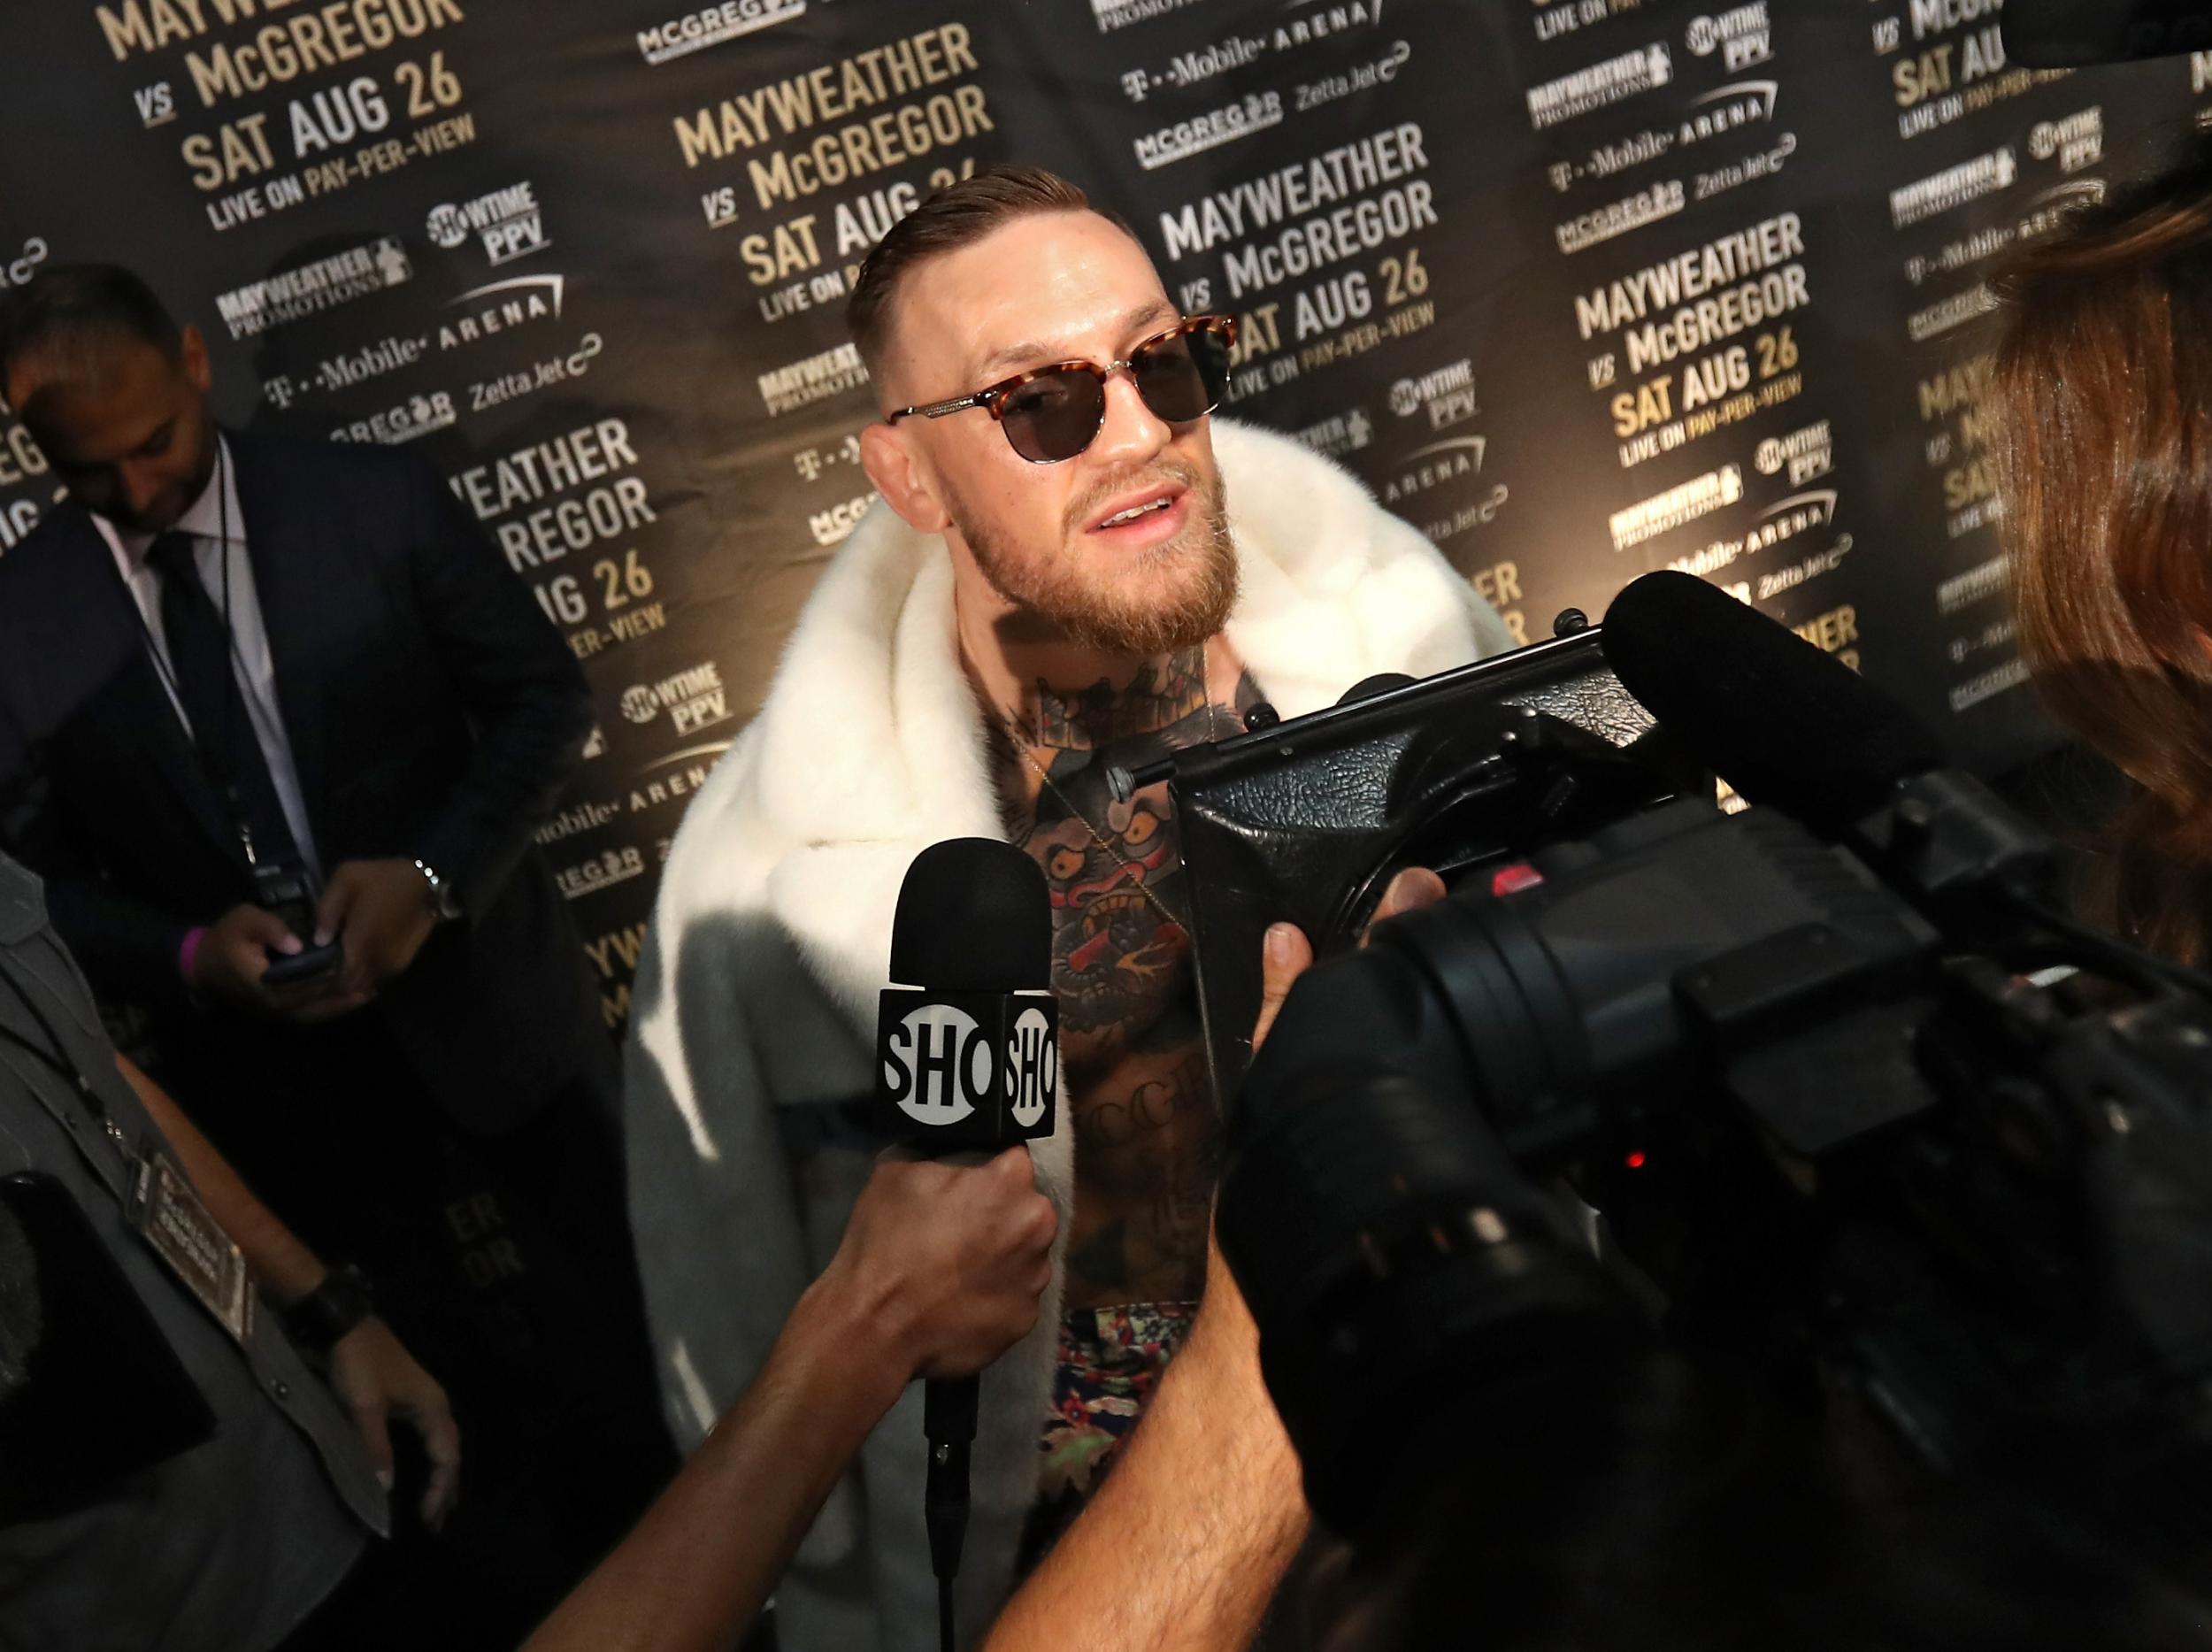 McGregor has been criticised for wearing a CJ Watson jersey